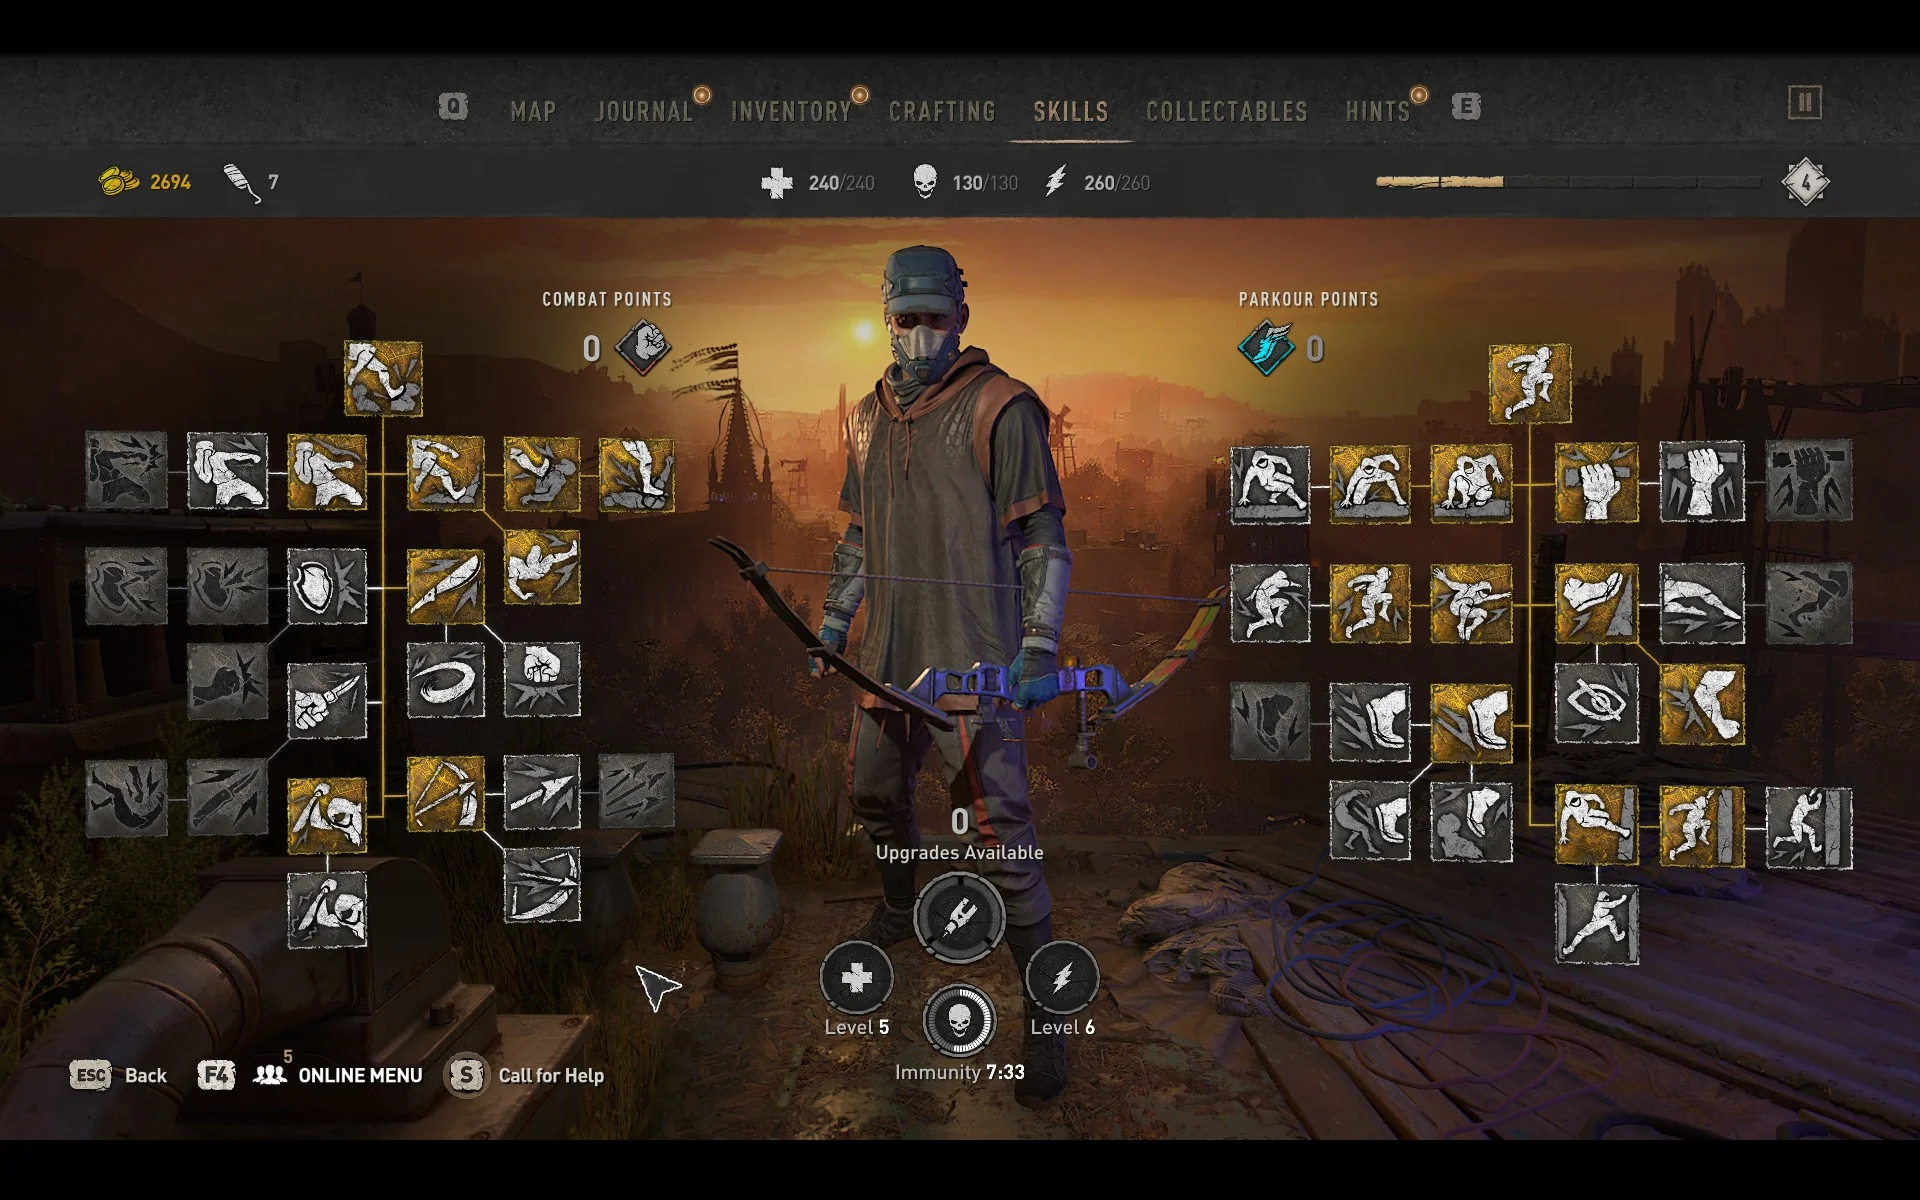 Dying Light 2 builds